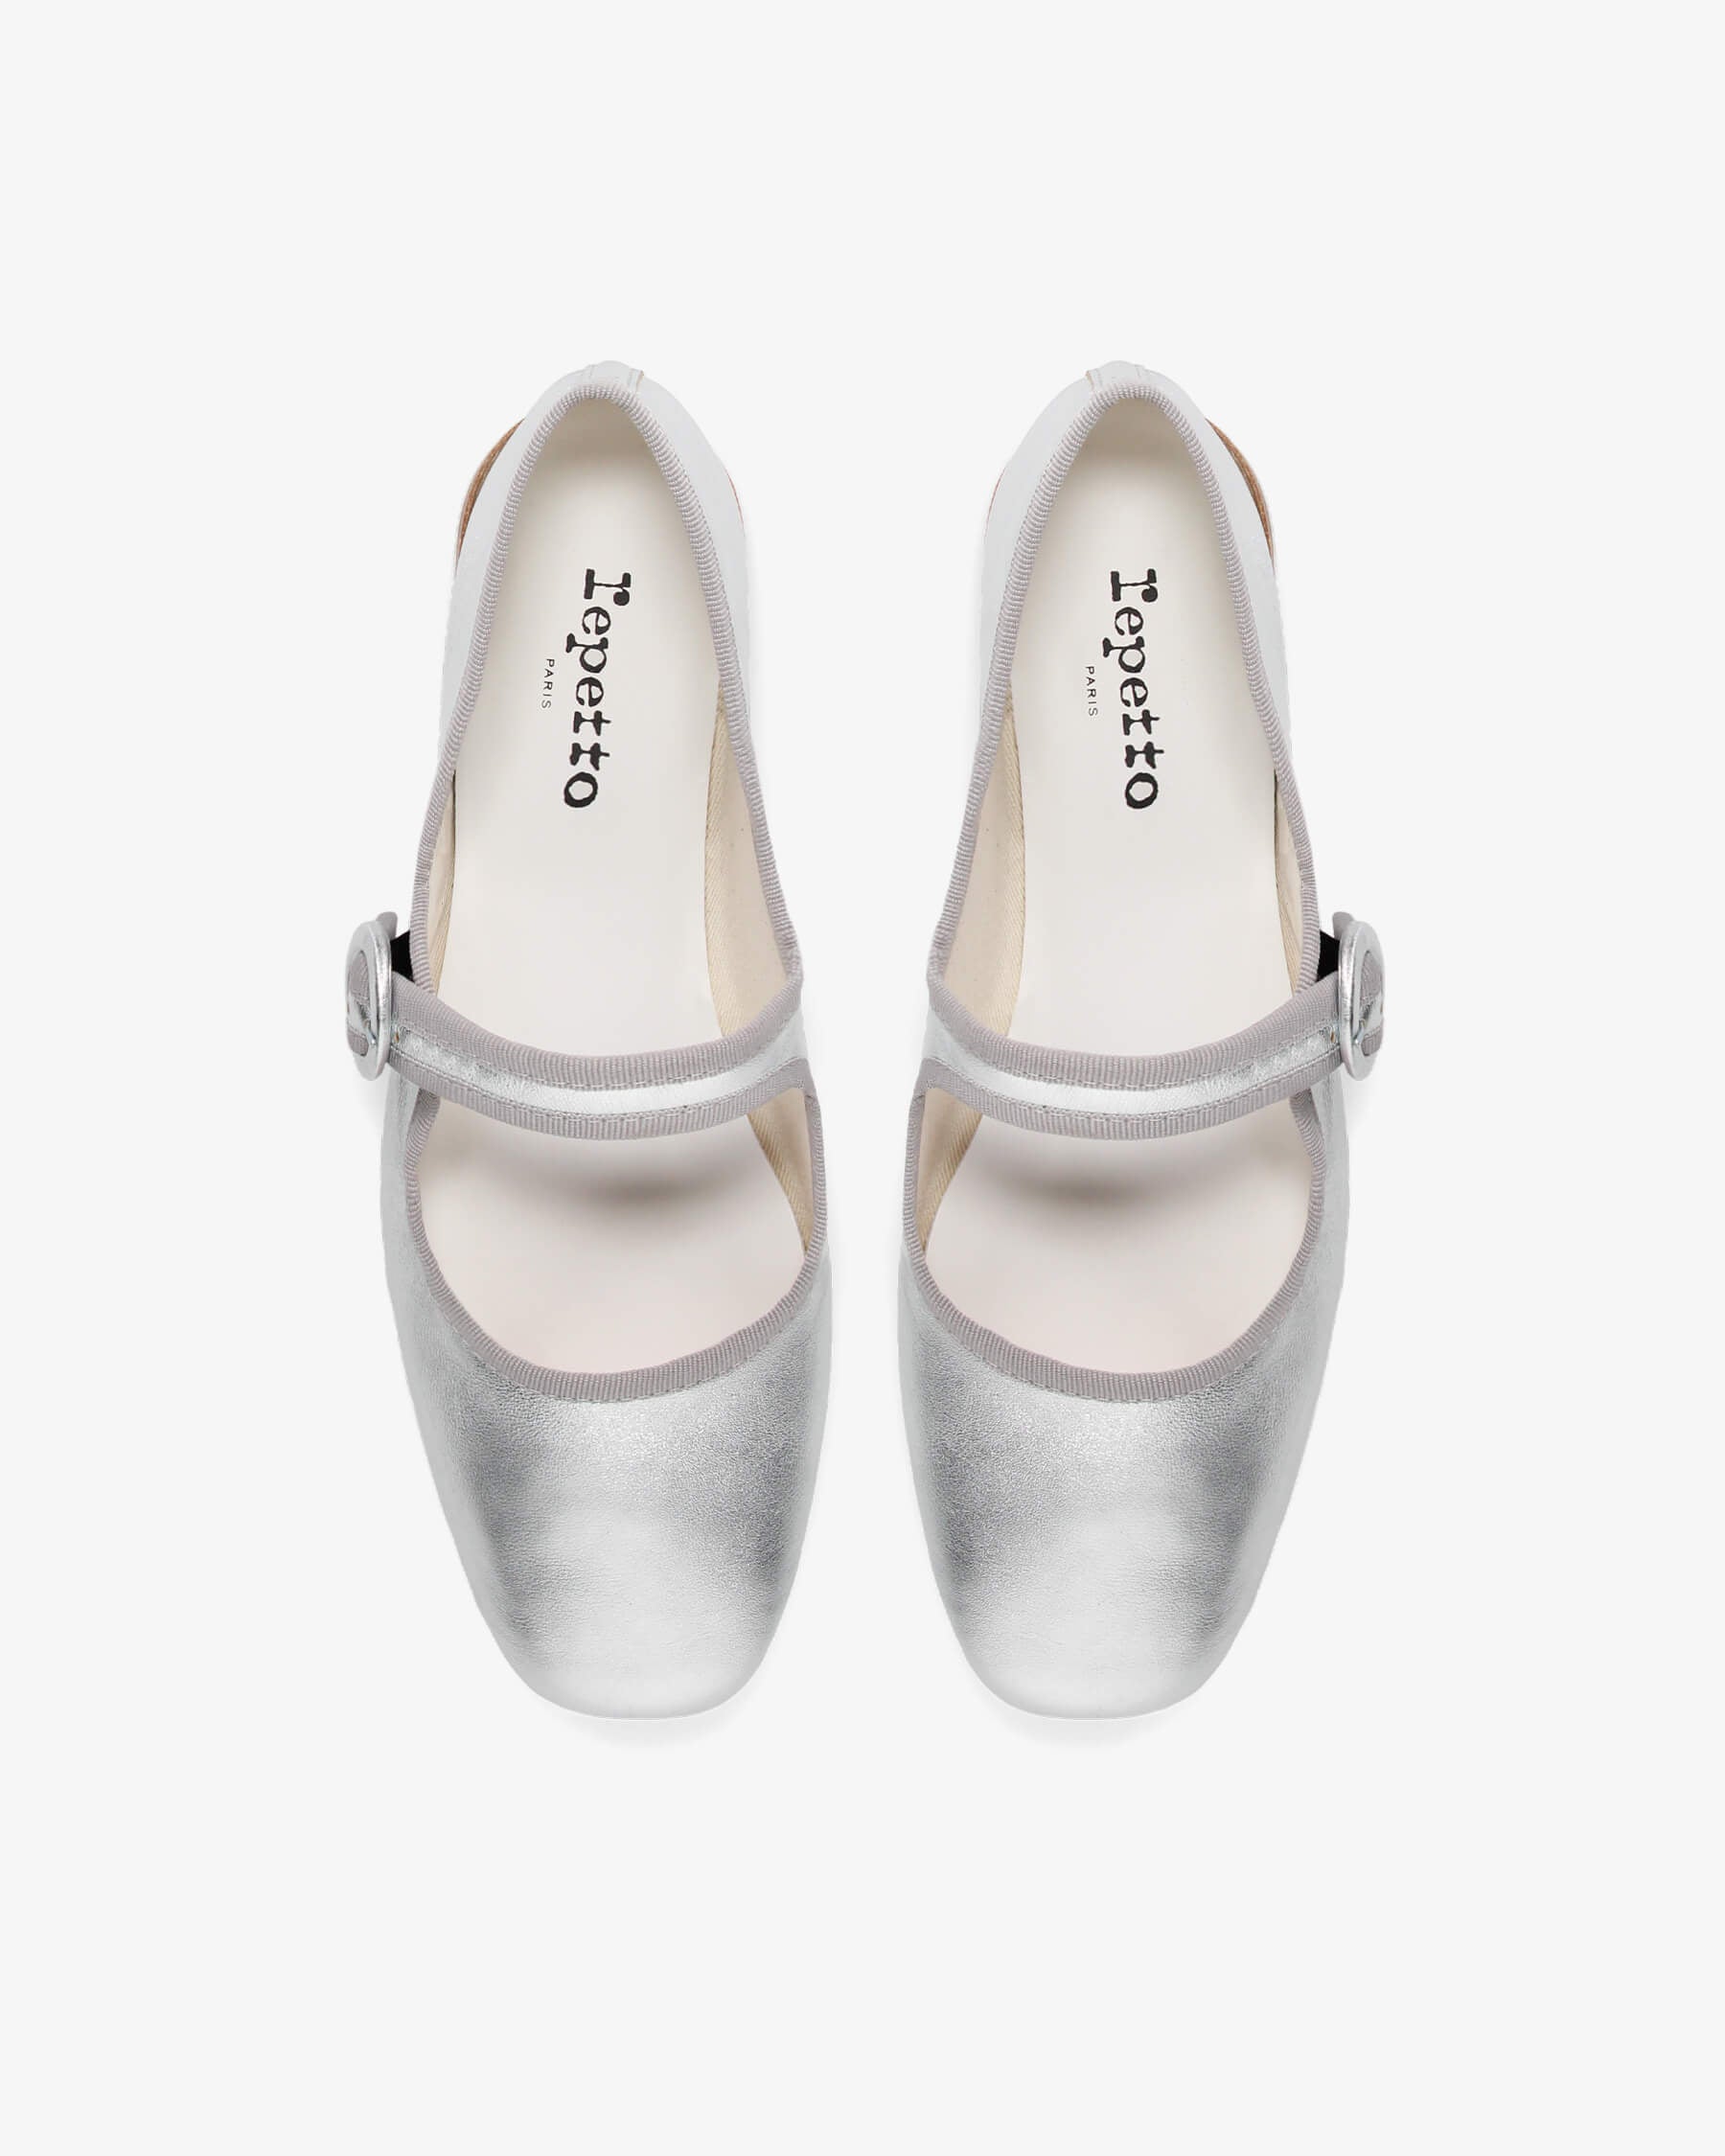 Repetto | New Collection